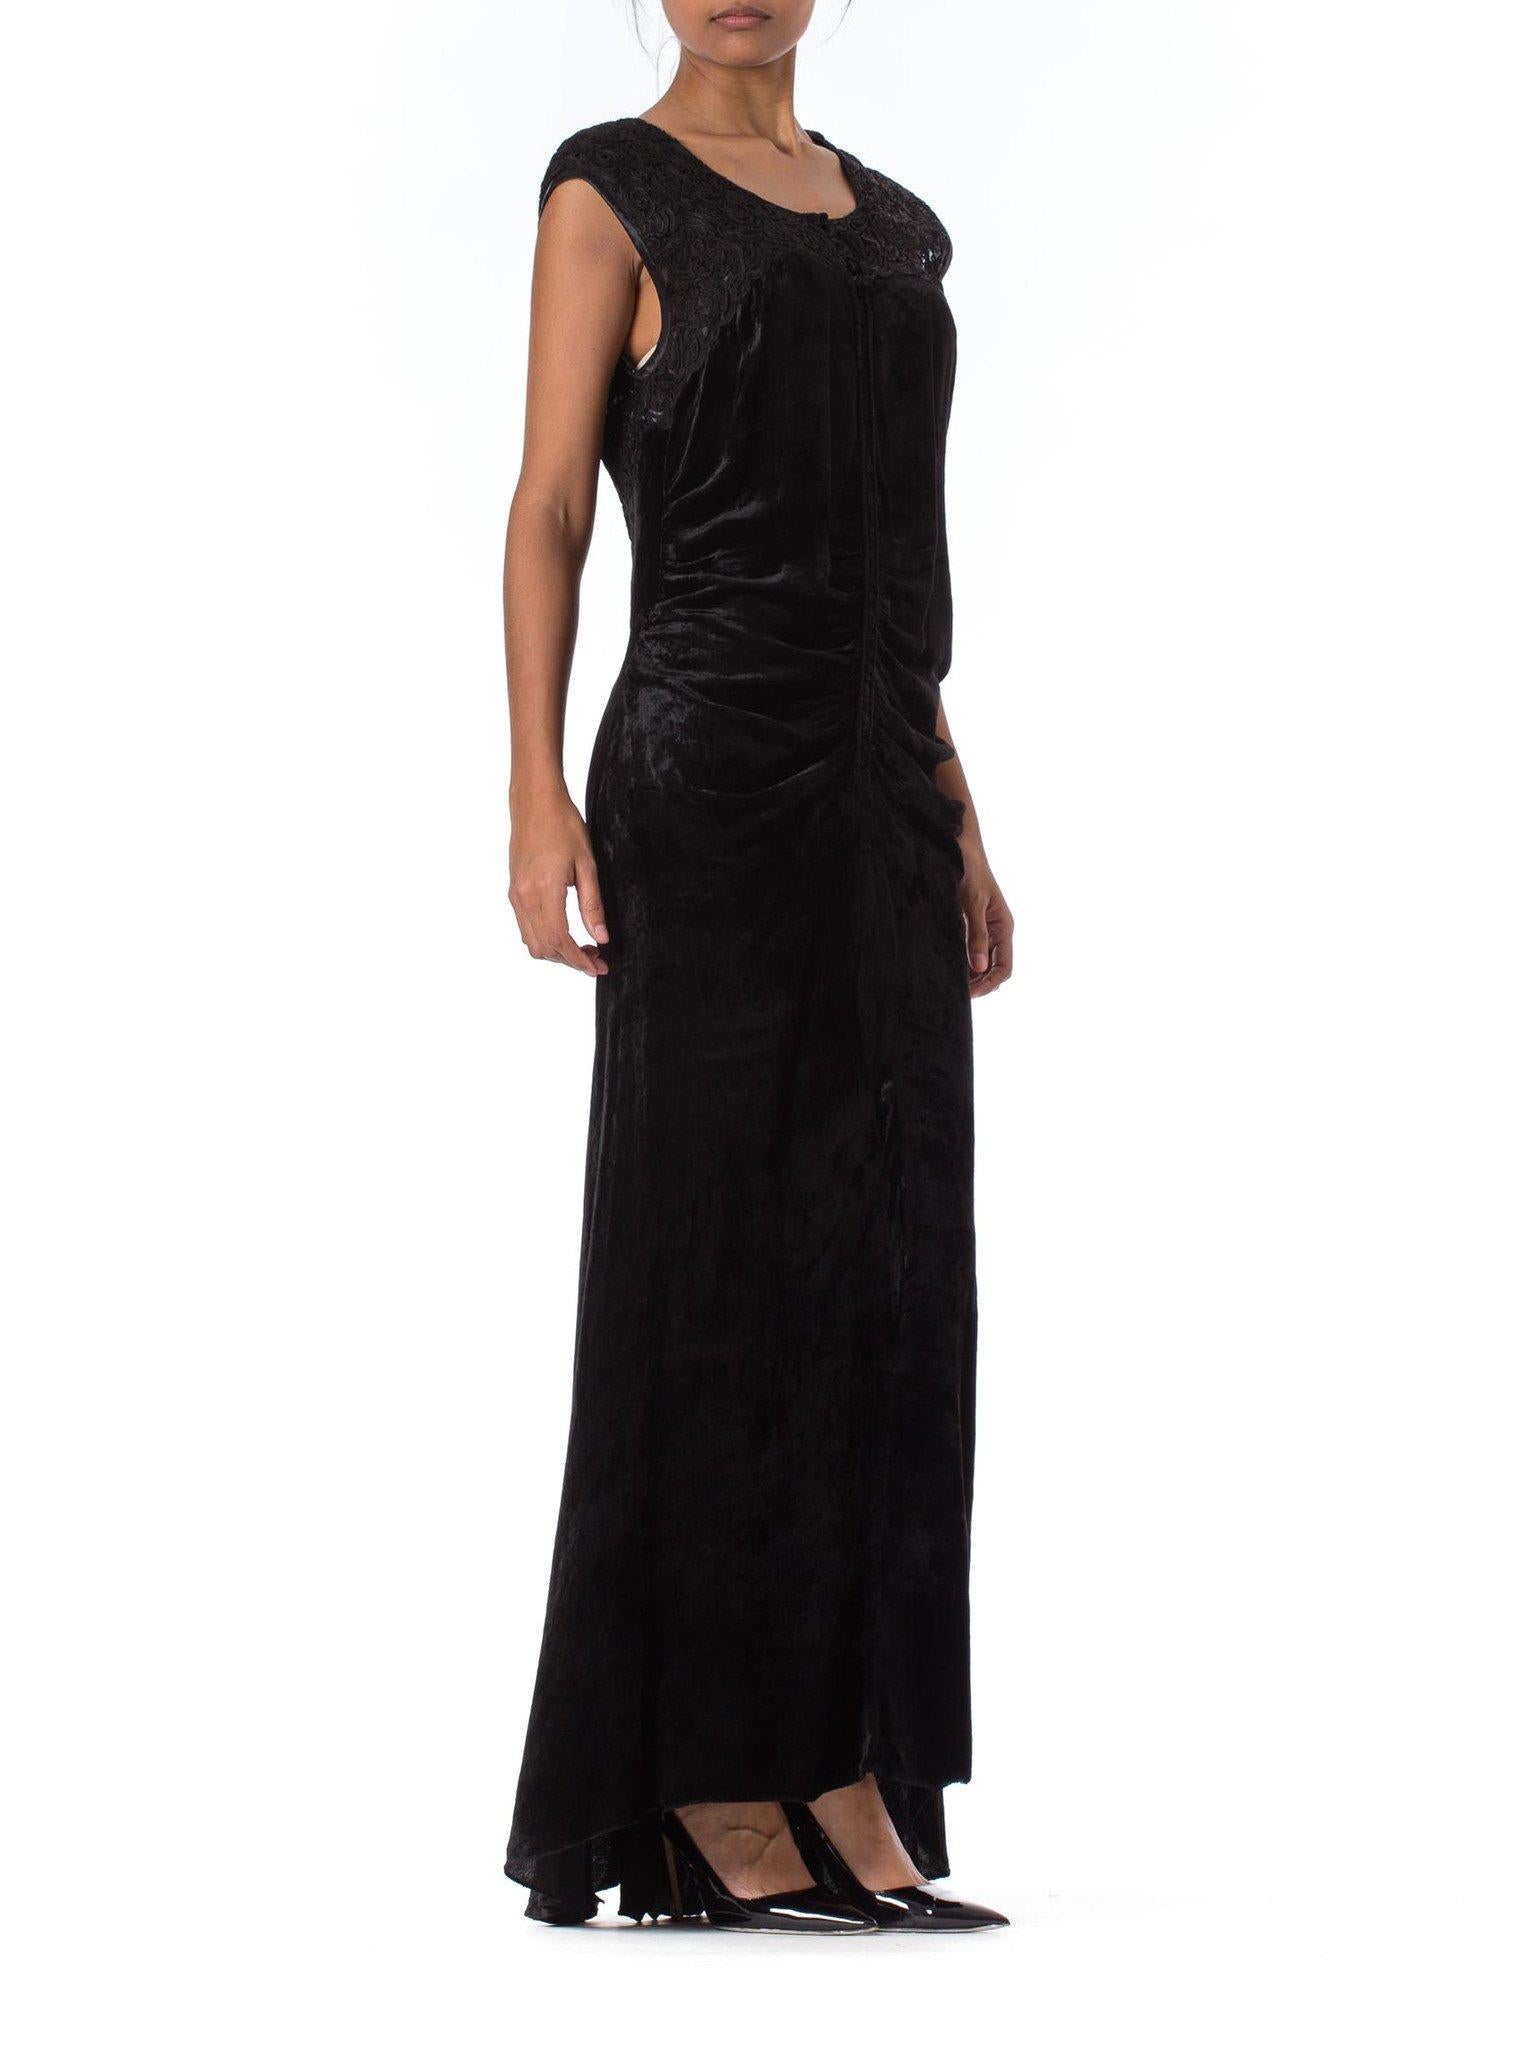 1930S Black Silk Velvet Bias-Cut Gown With Slight Train & Embroidered Lace Bodice